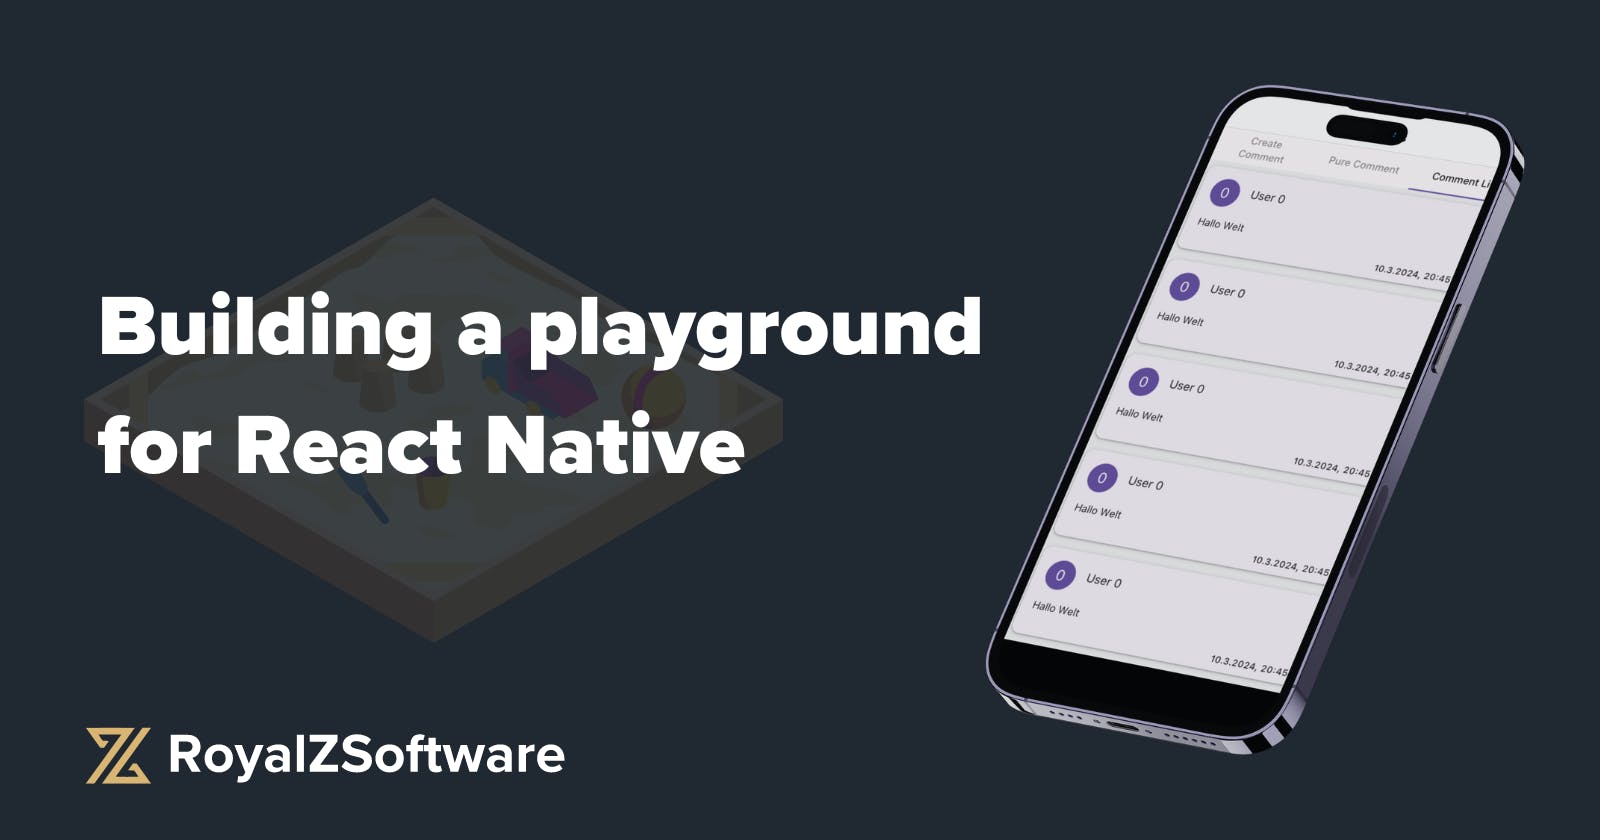 Building a playground for React Native